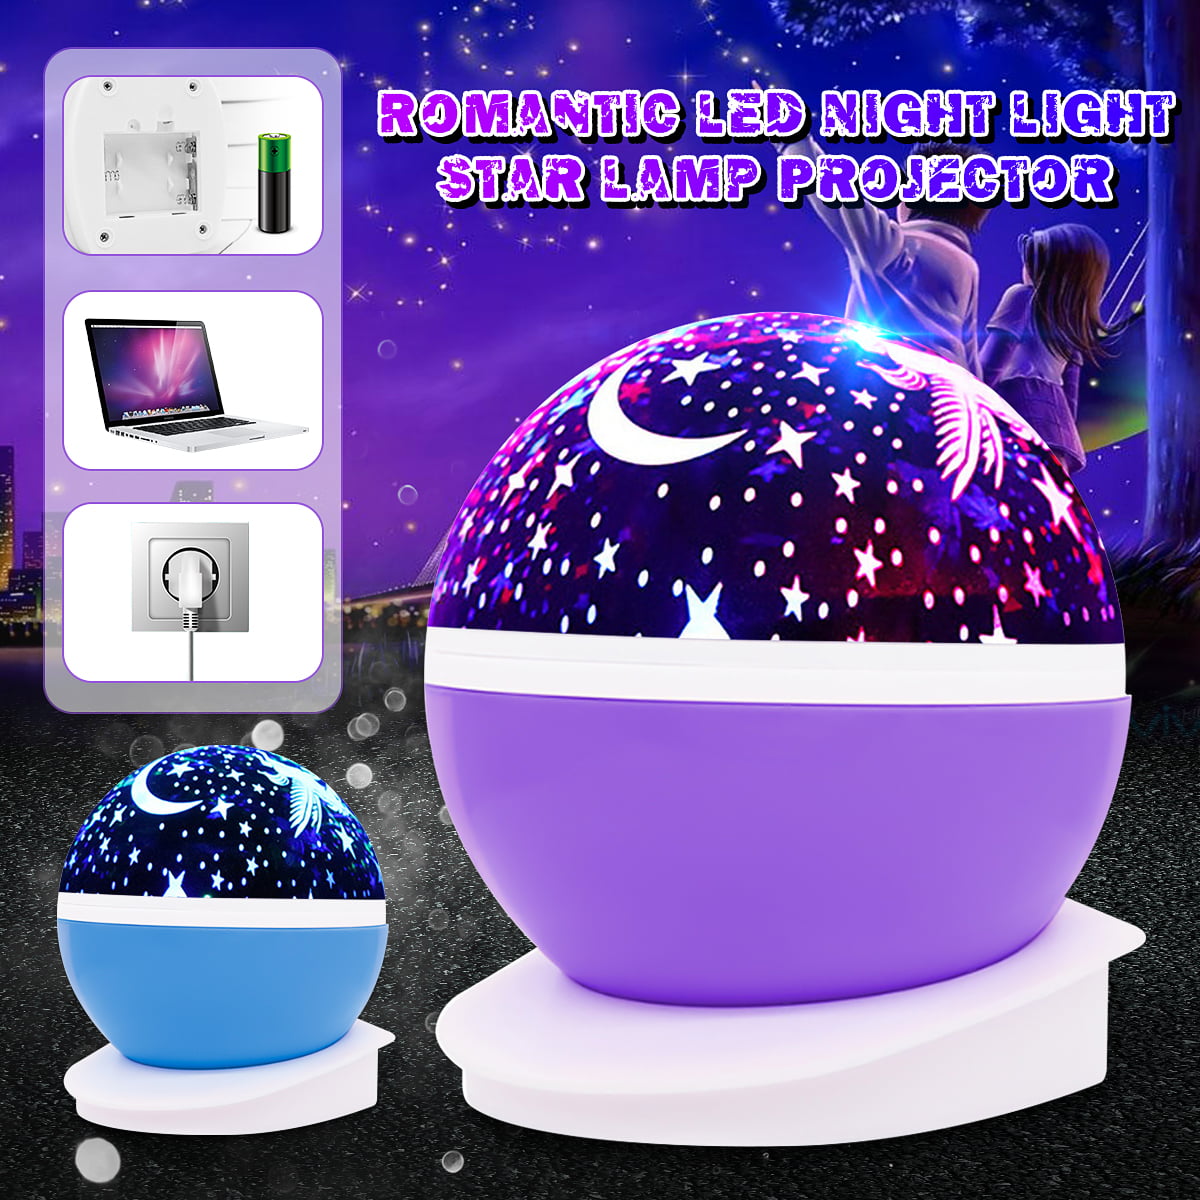 Details about   Baby Kids Constellation Night Light Lamp Moon Star Sky Projector Rotating Gift 